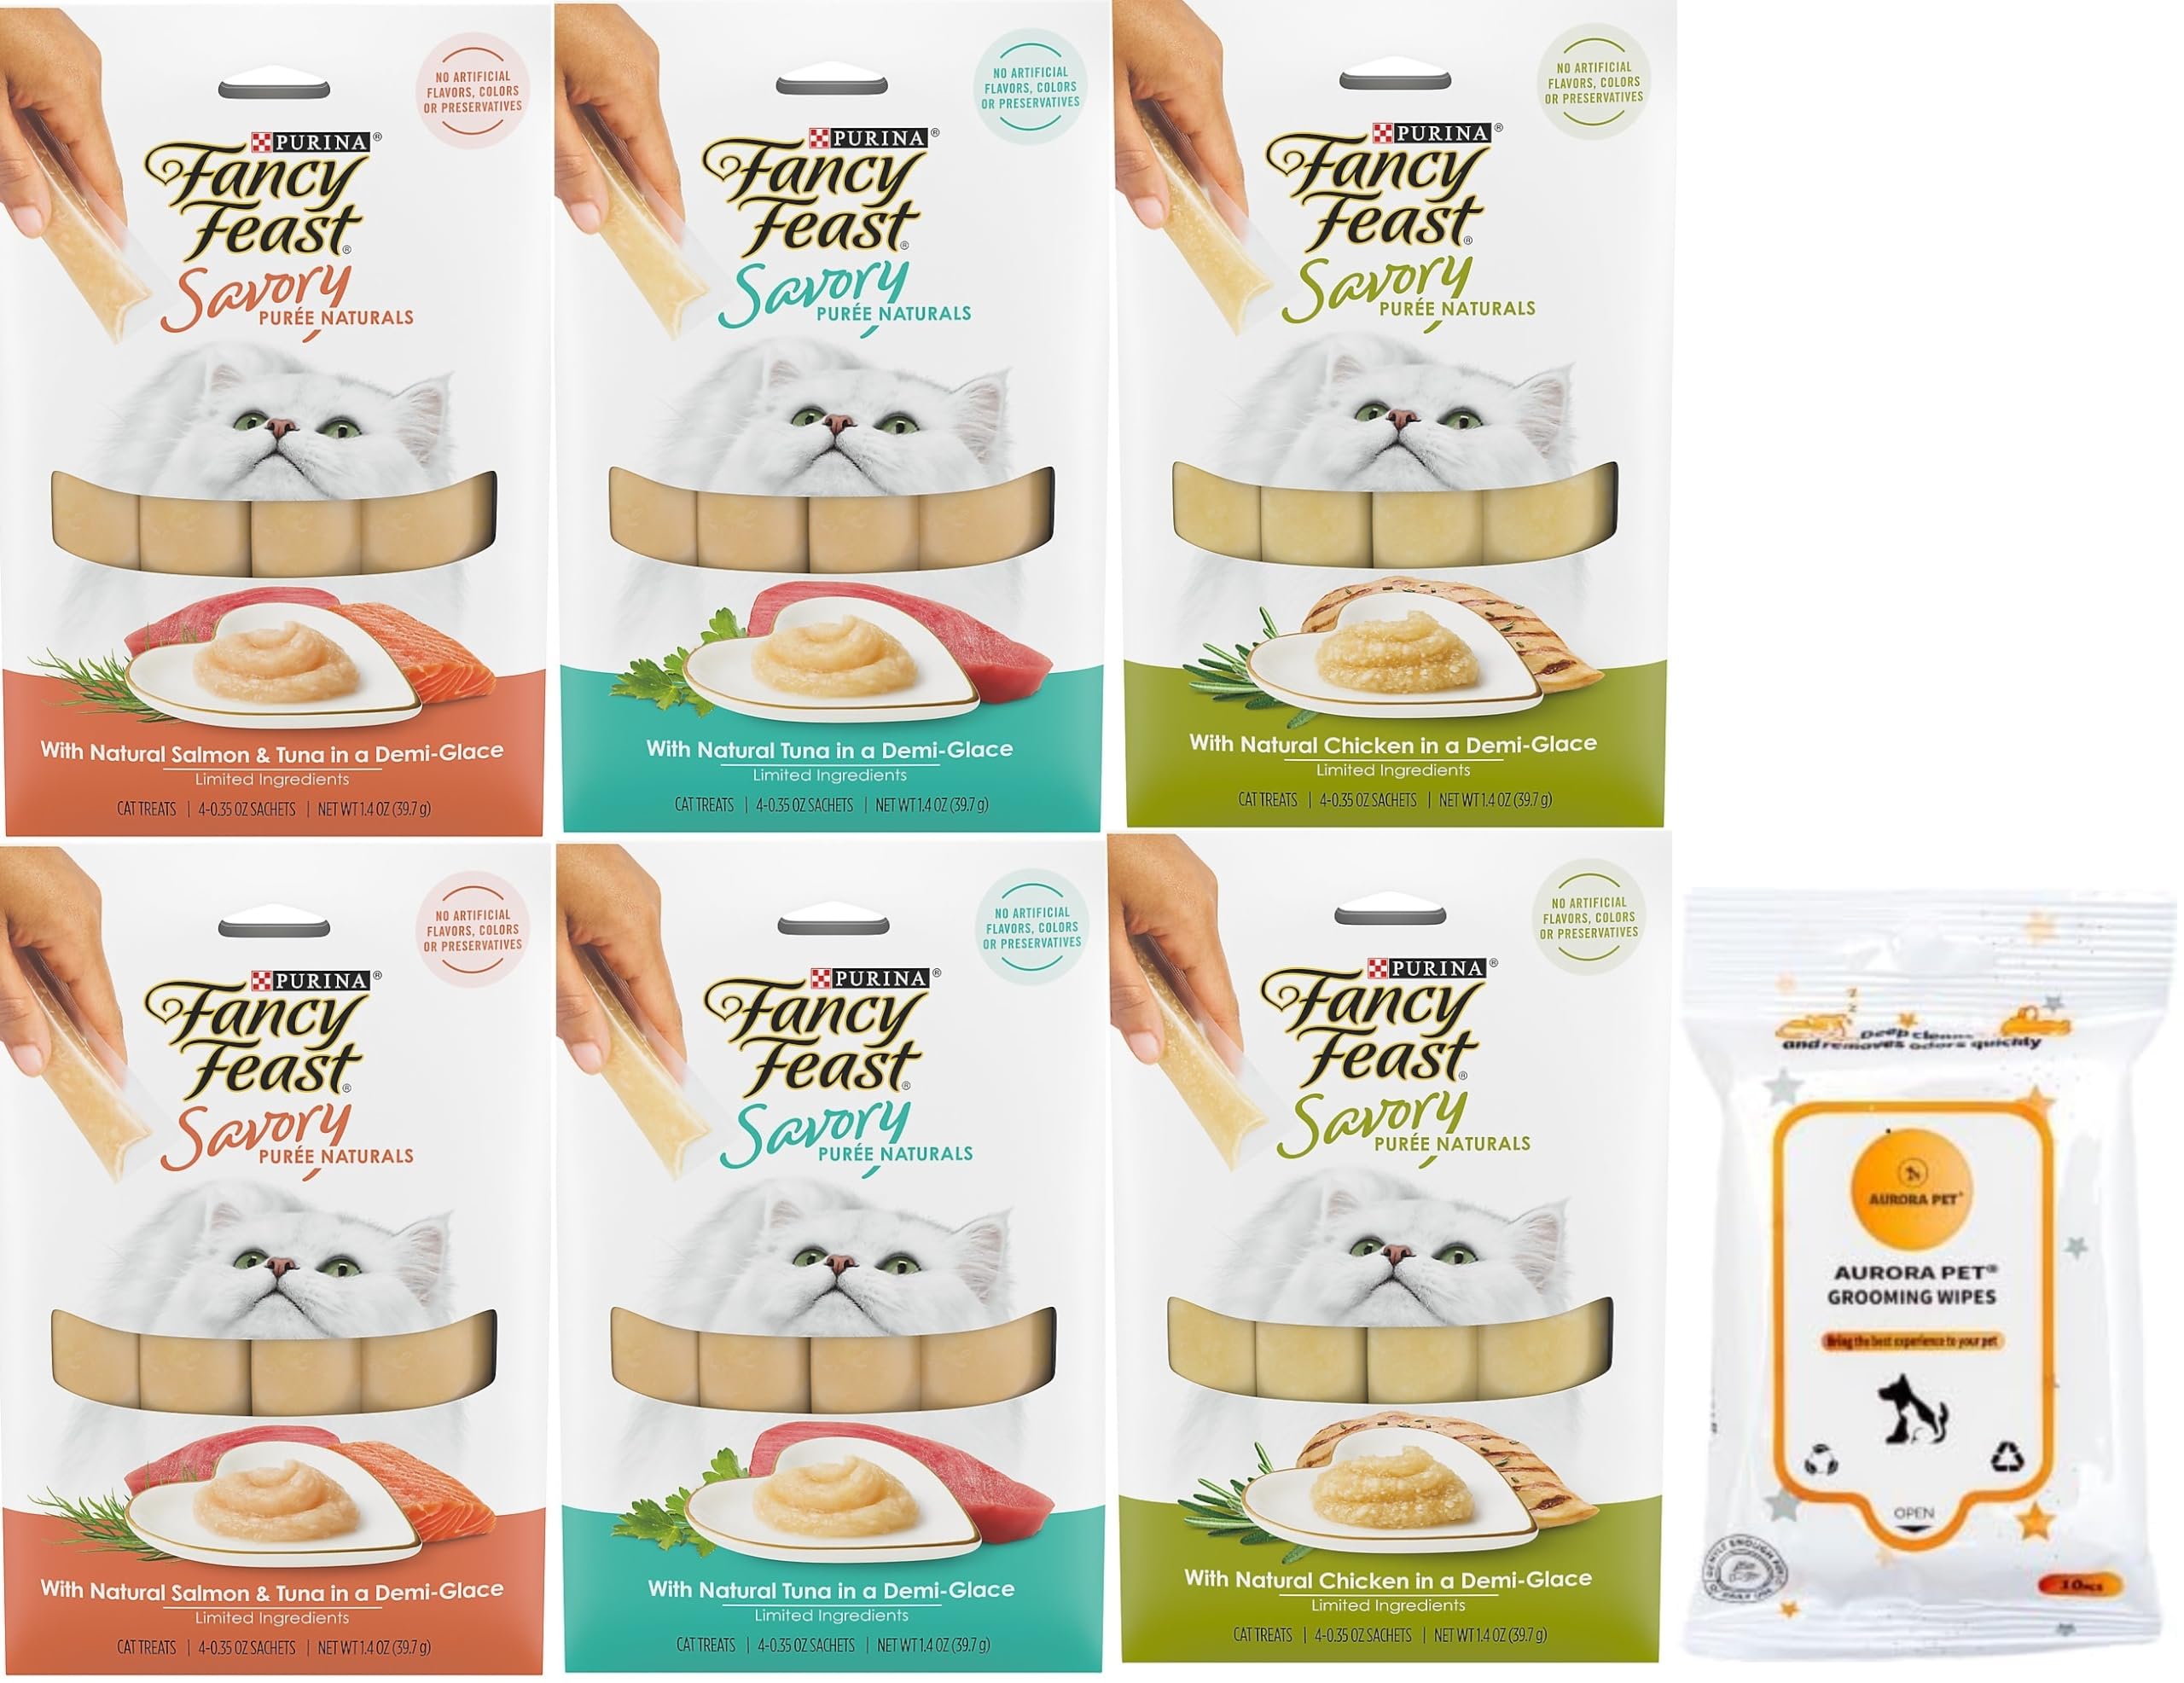 Purina Fancy Feast Savory Puree Naturals Chicken Squeezable Tubes Cat Treats - 1.4 Oz - Case of 30  